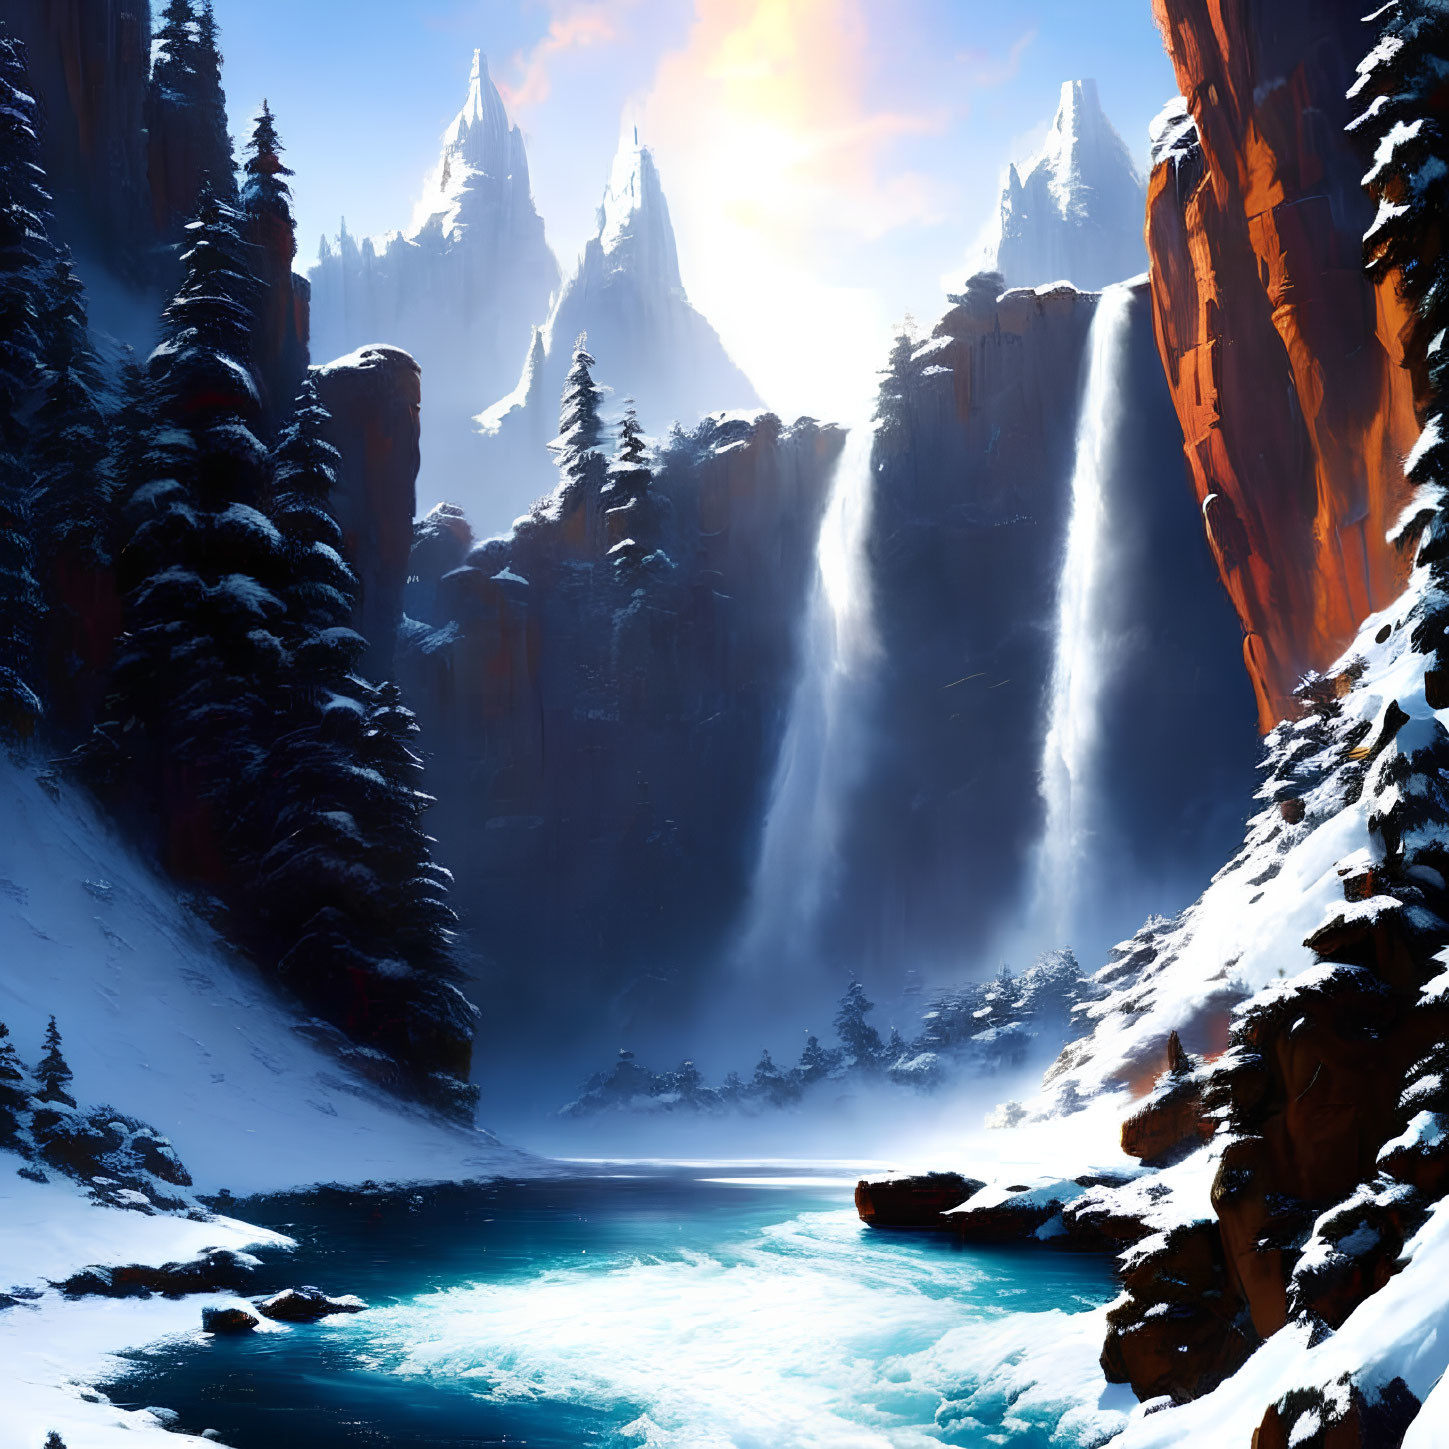 Snowy Landscape with River and Sunlit Cliffs: Serene Winter Scene